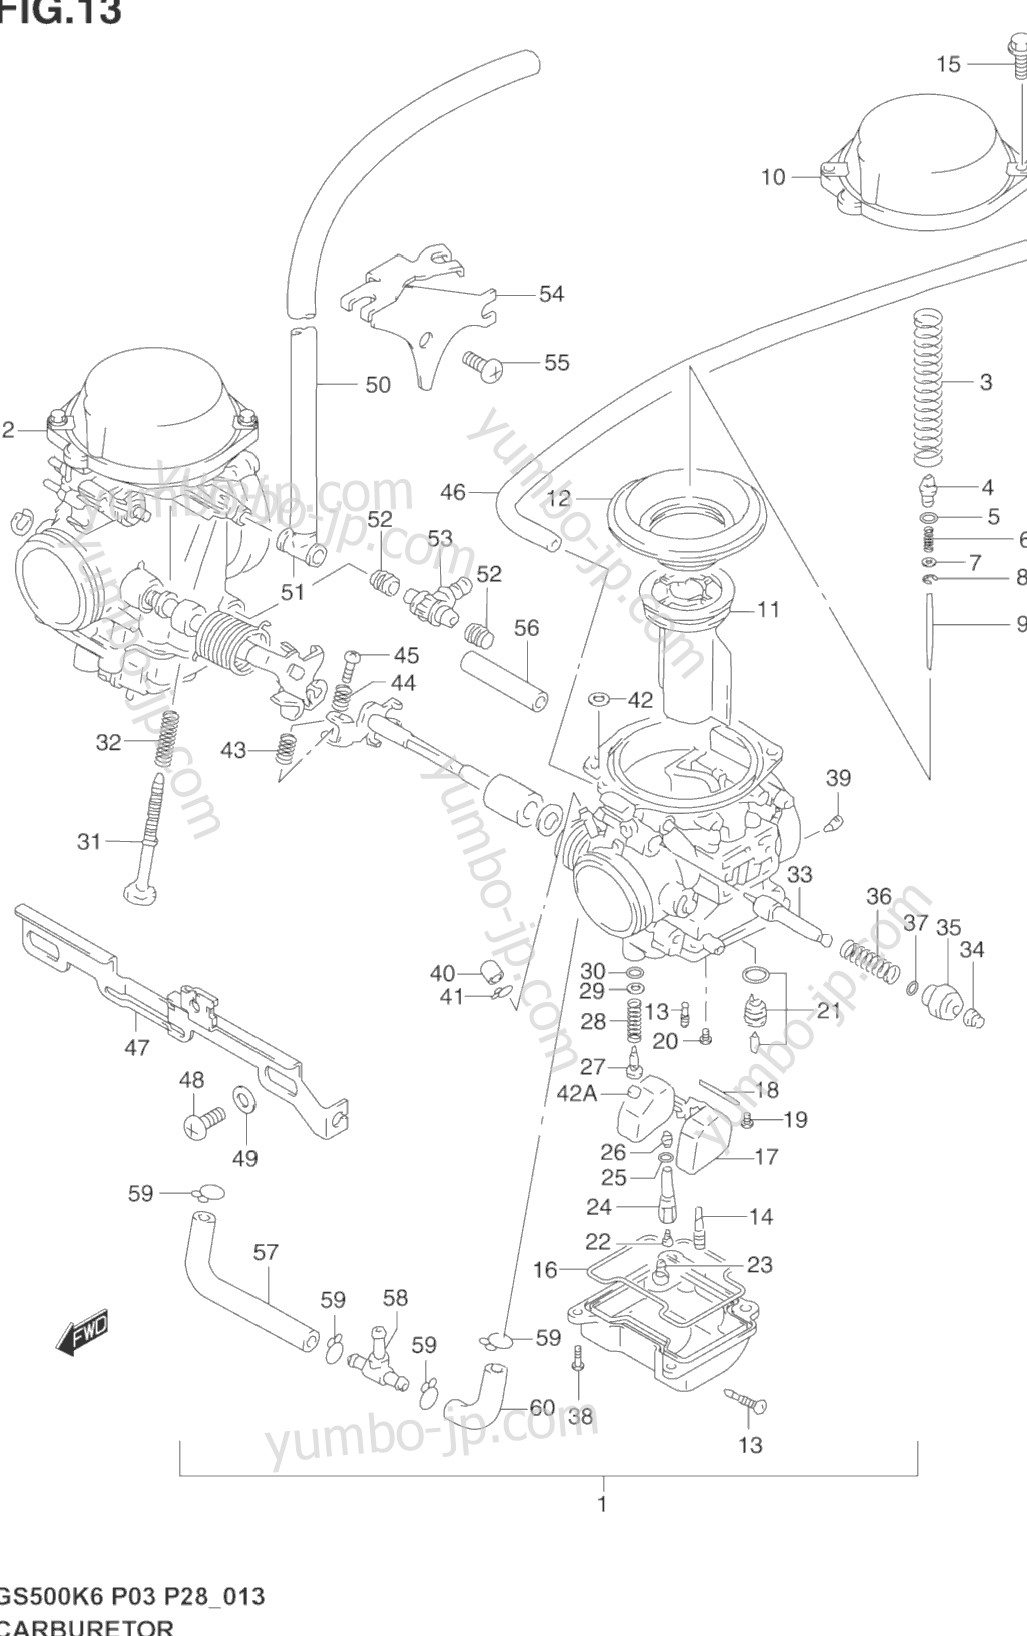 CARBURETOR (NOT FOR U.S. MARKET) for motorcycles SUZUKI GS500F 2005 year